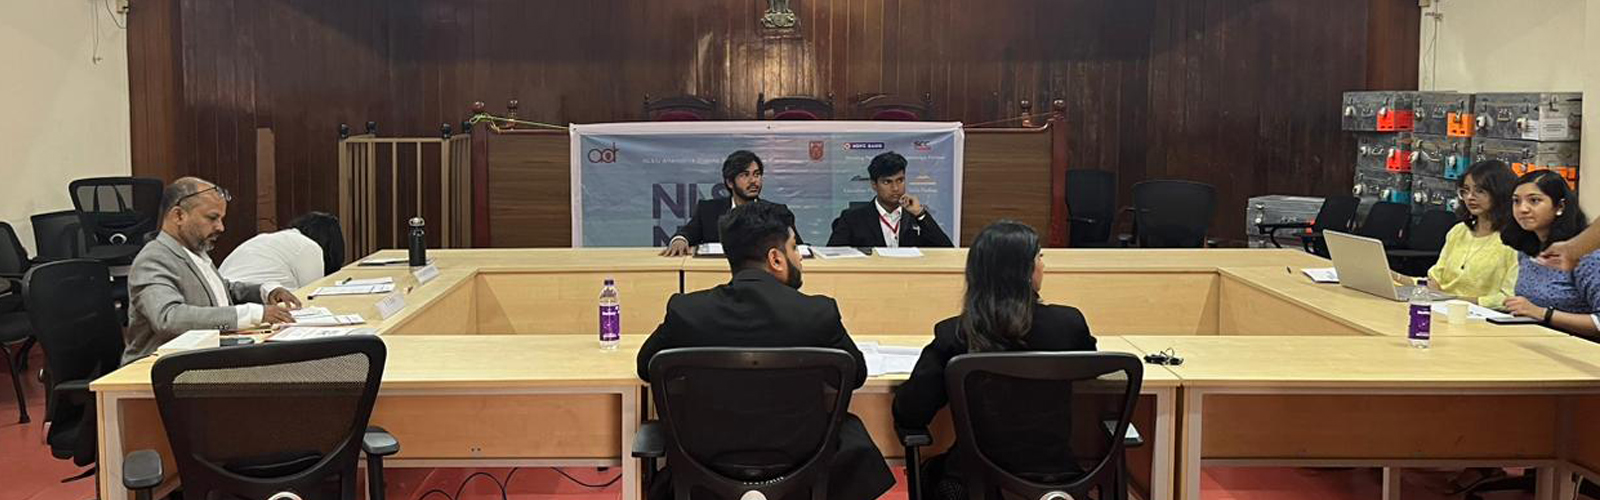 NLSIU & Bettering Results collaboration for IX NMC as a Skills Partner